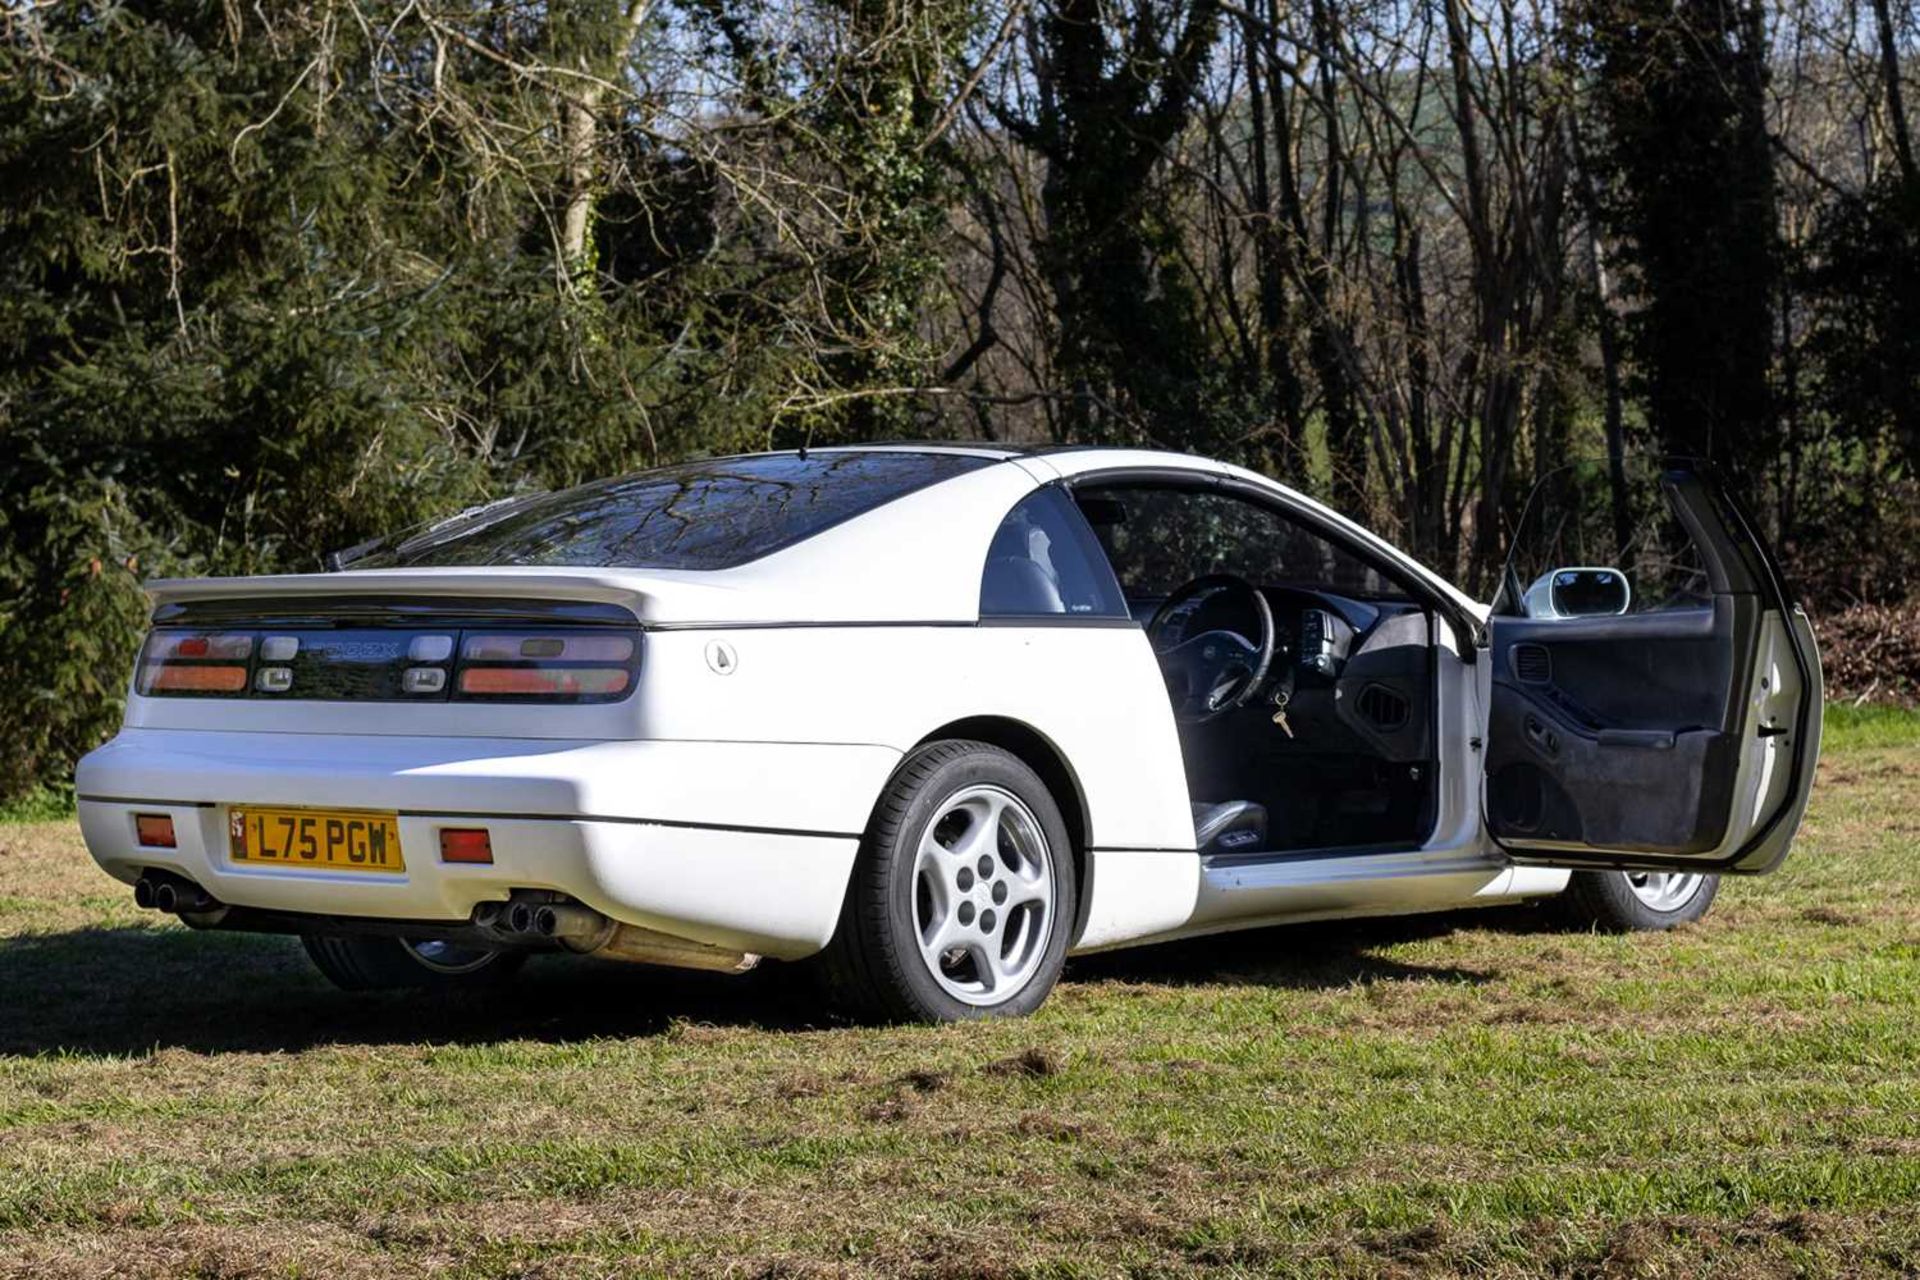 1990 Nissan 300ZX Turbo 2+2 Targa One of the last examples registered in the UK - Image 47 of 89